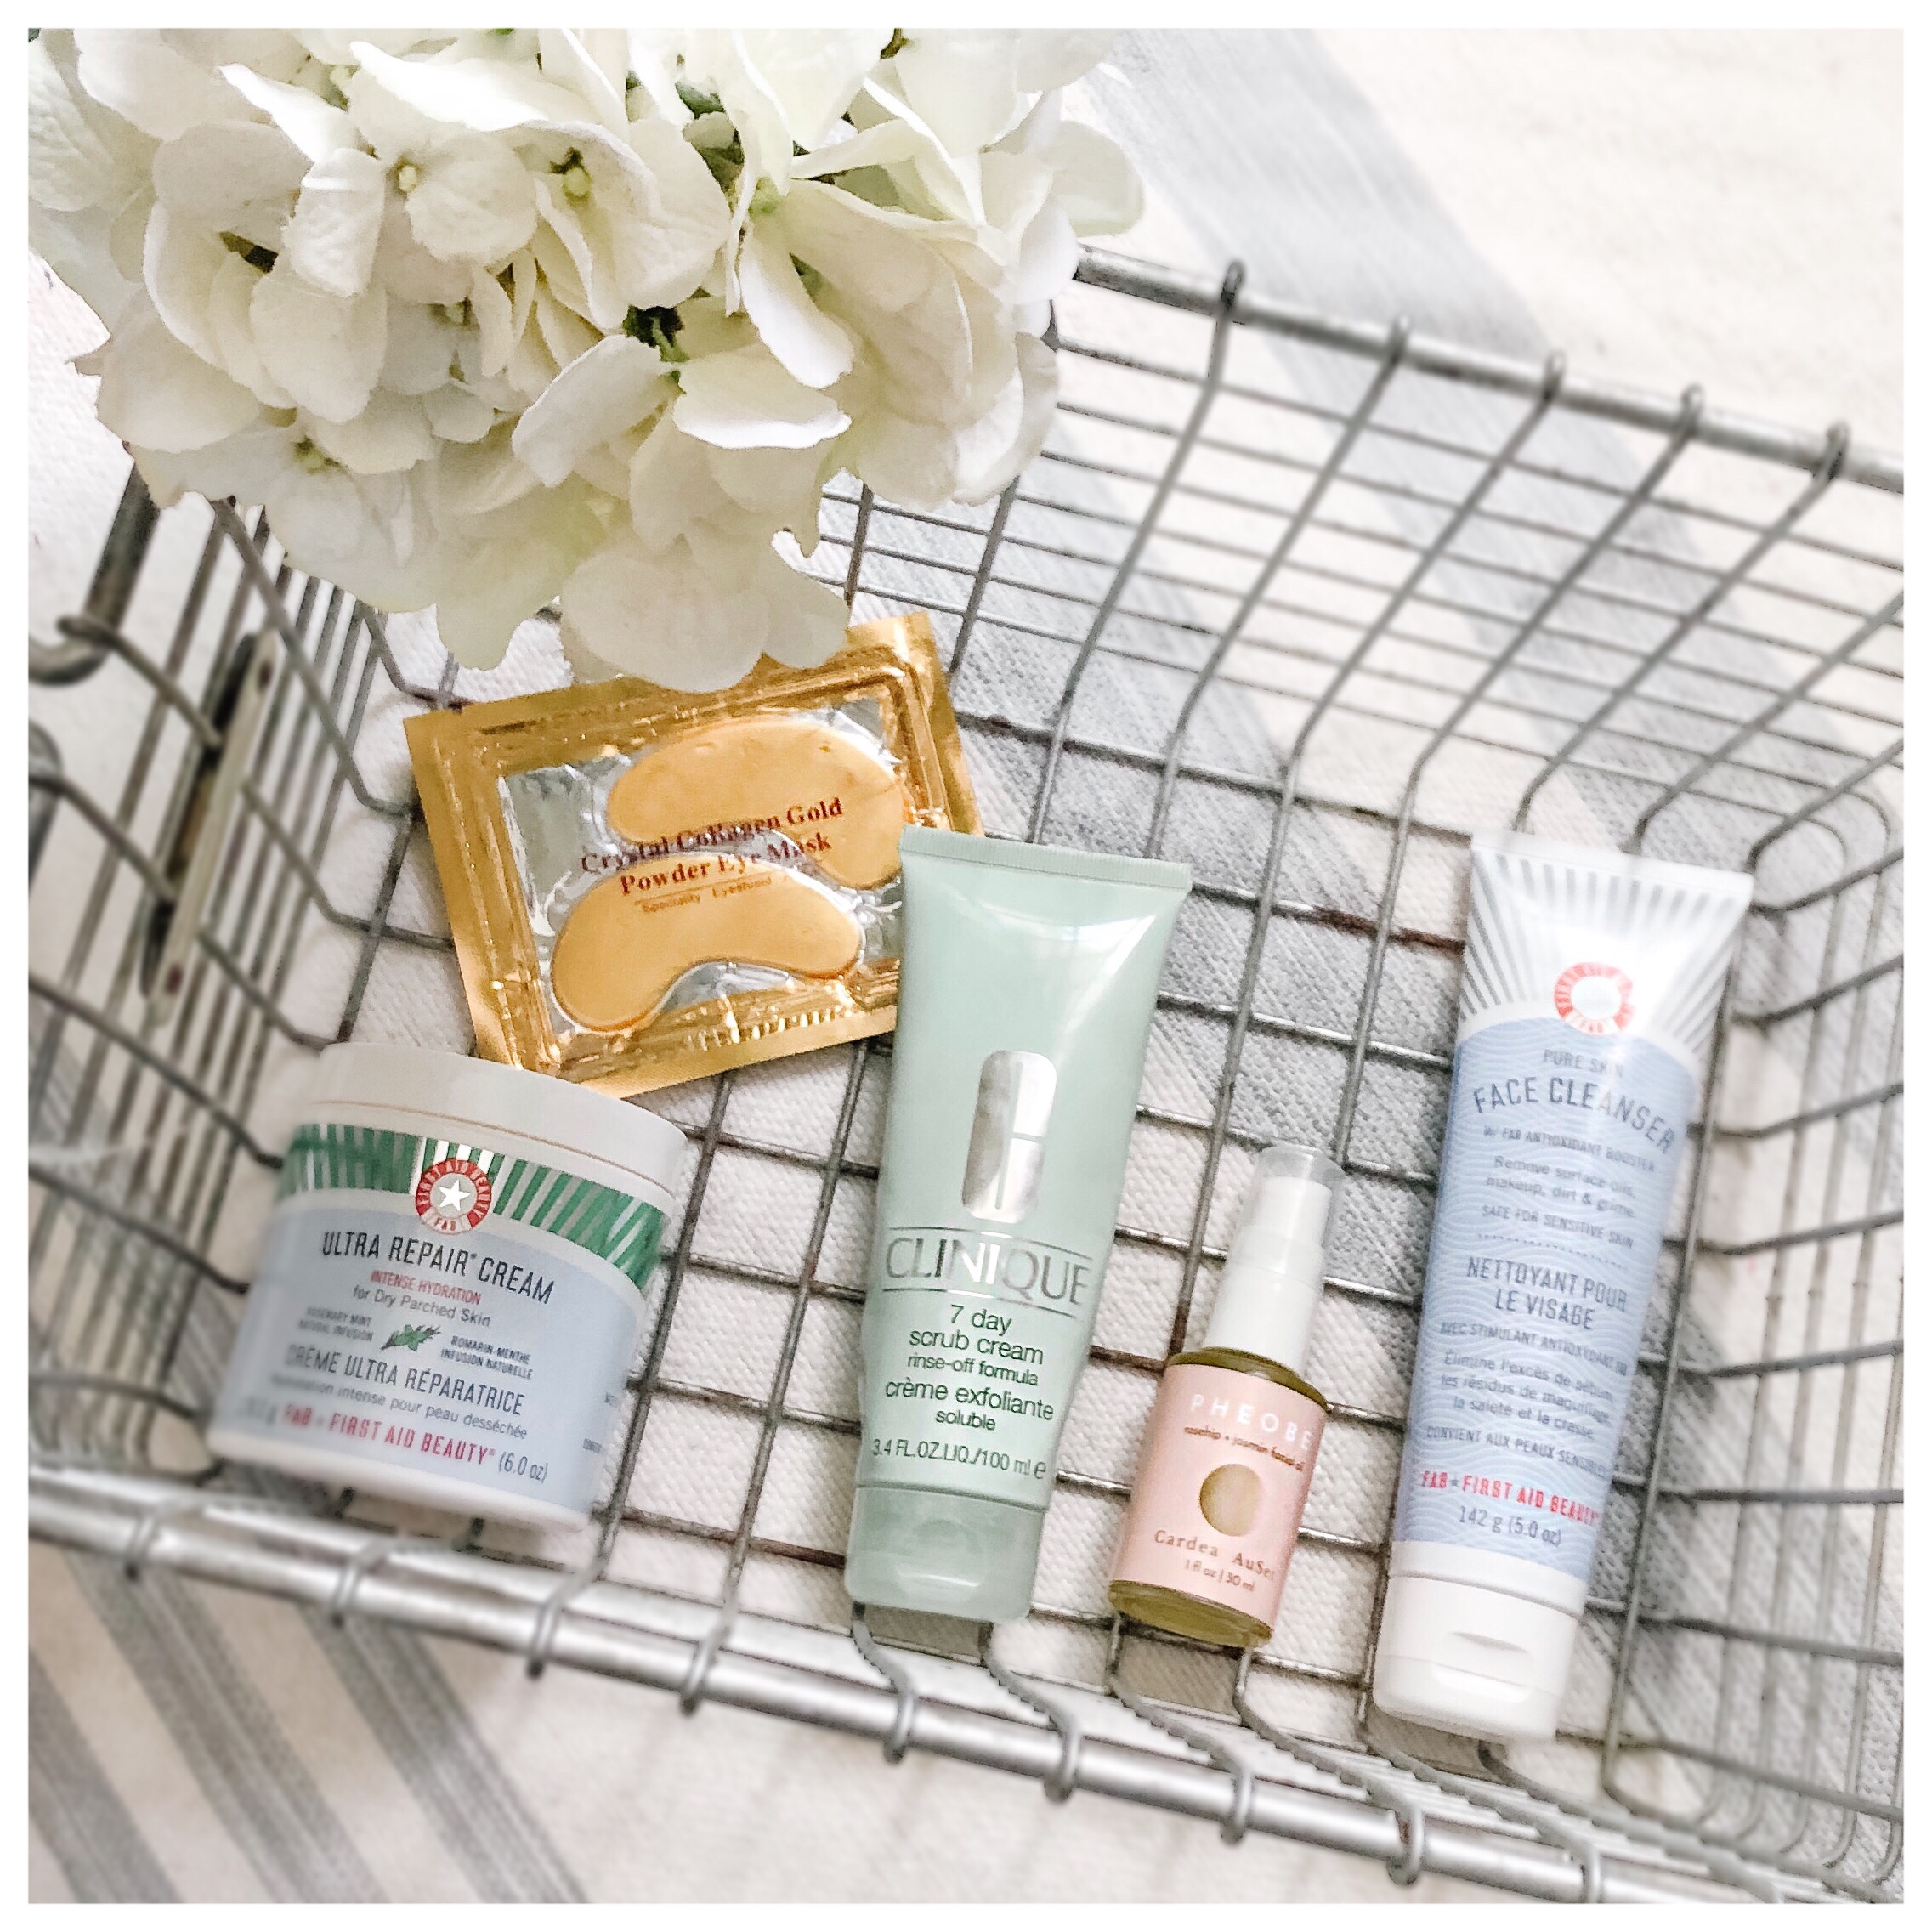 A lot of things change when you reach your mid 30s, including your skincare routine